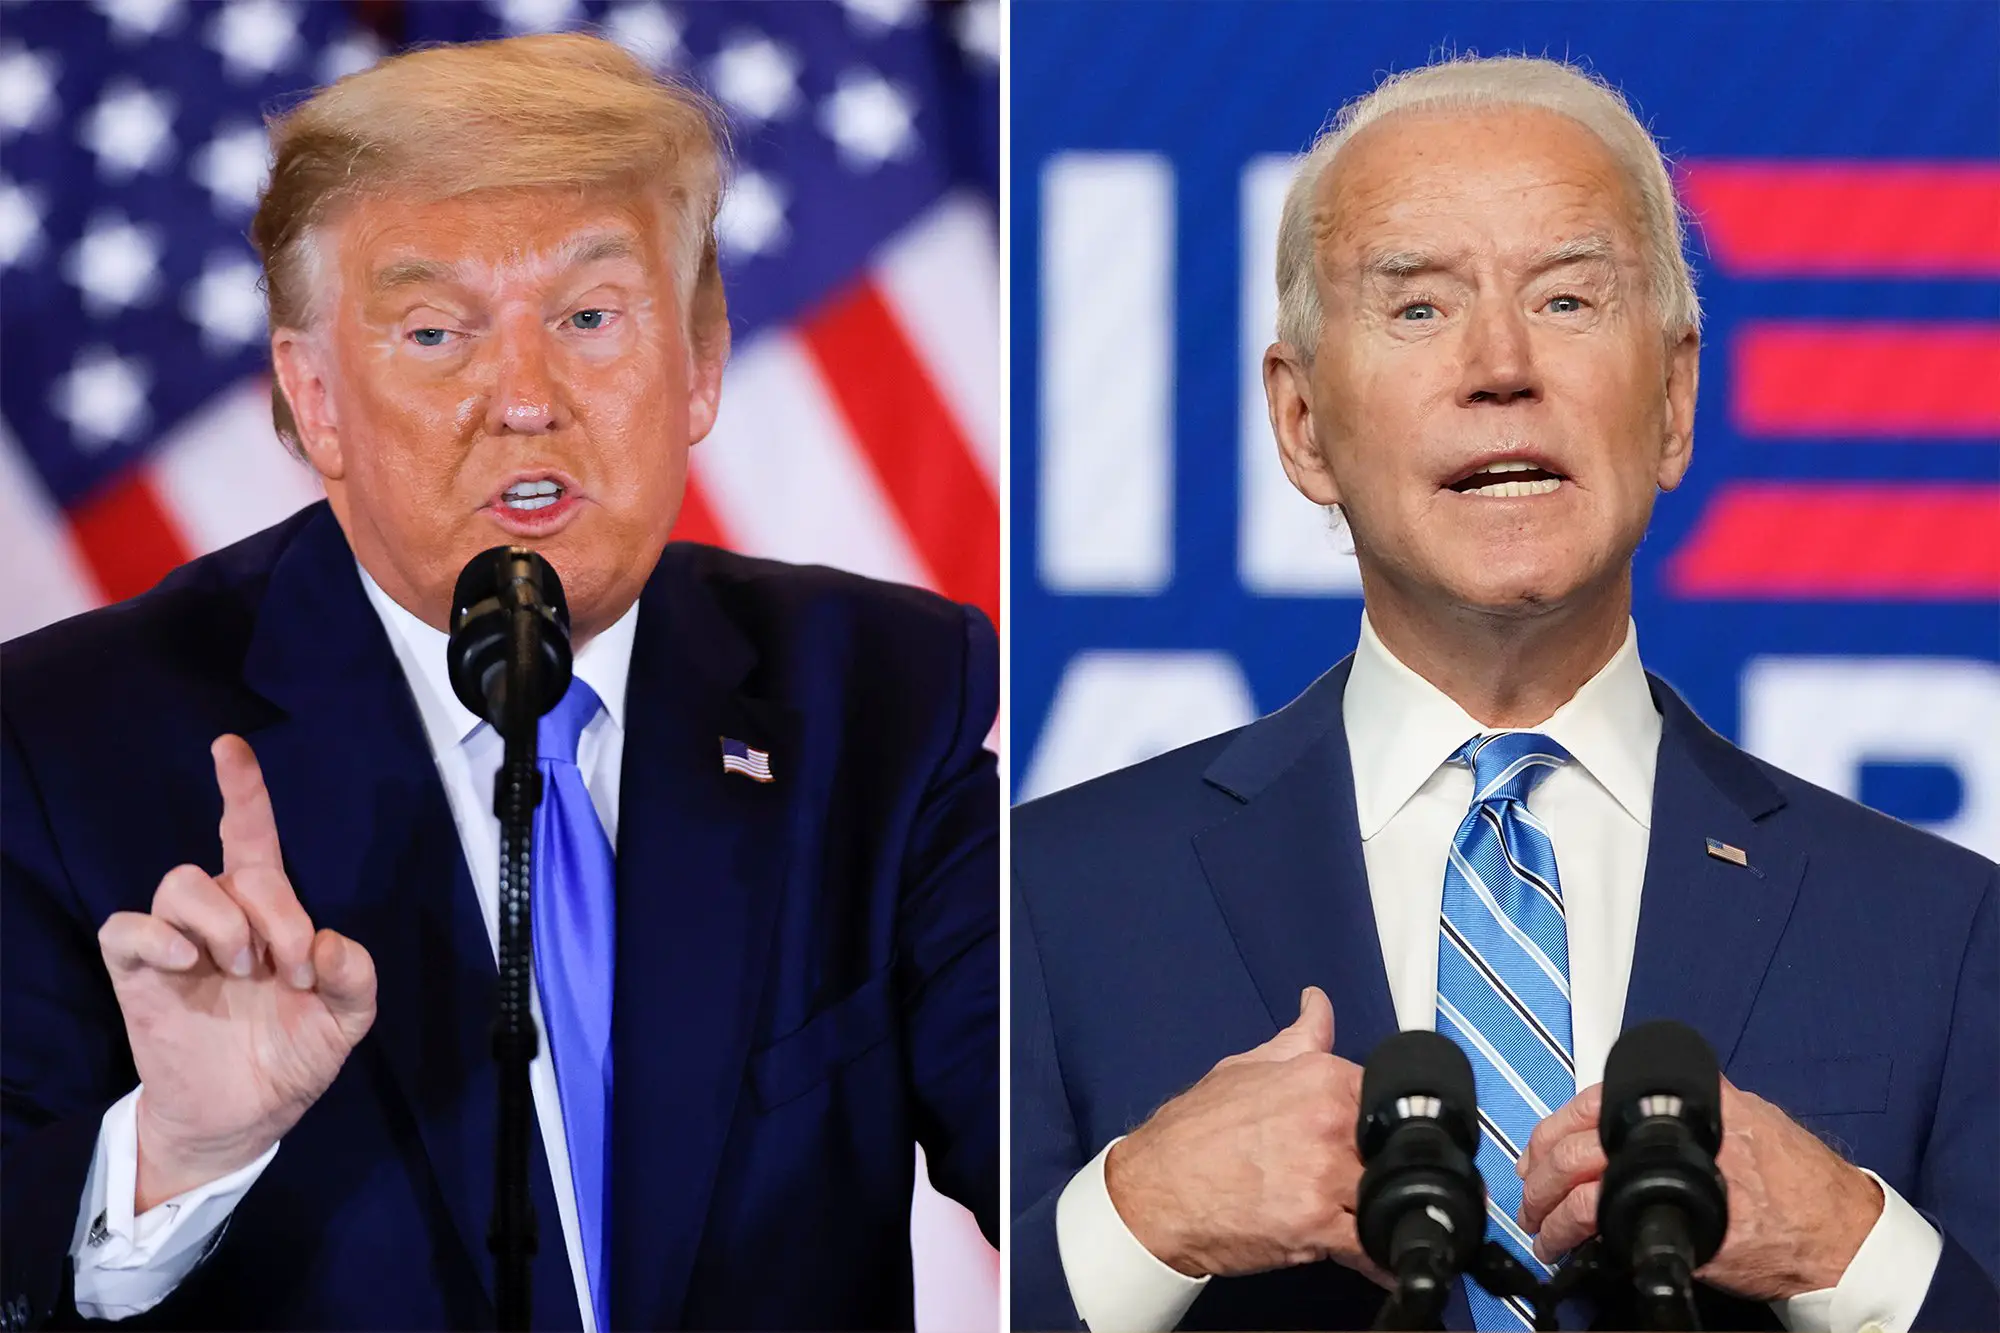 Both Trump and Biden are claiming victory in Pennsylvania